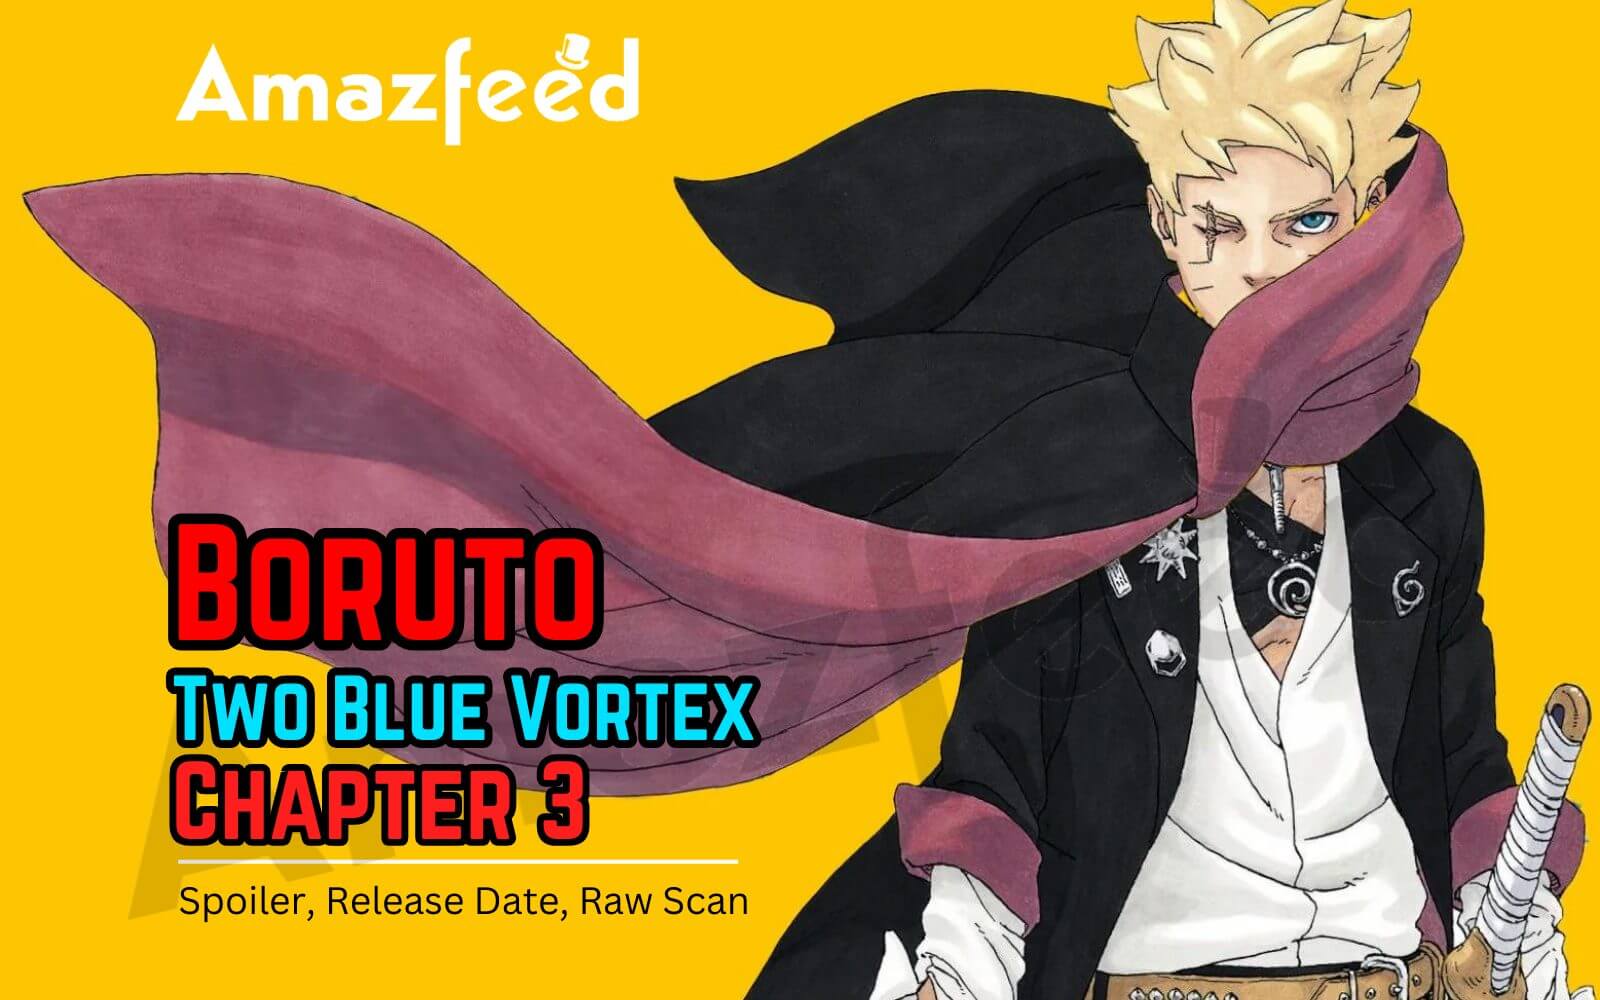 Boruto Two Blue Vortex chapter 3: Major spoilers to expect